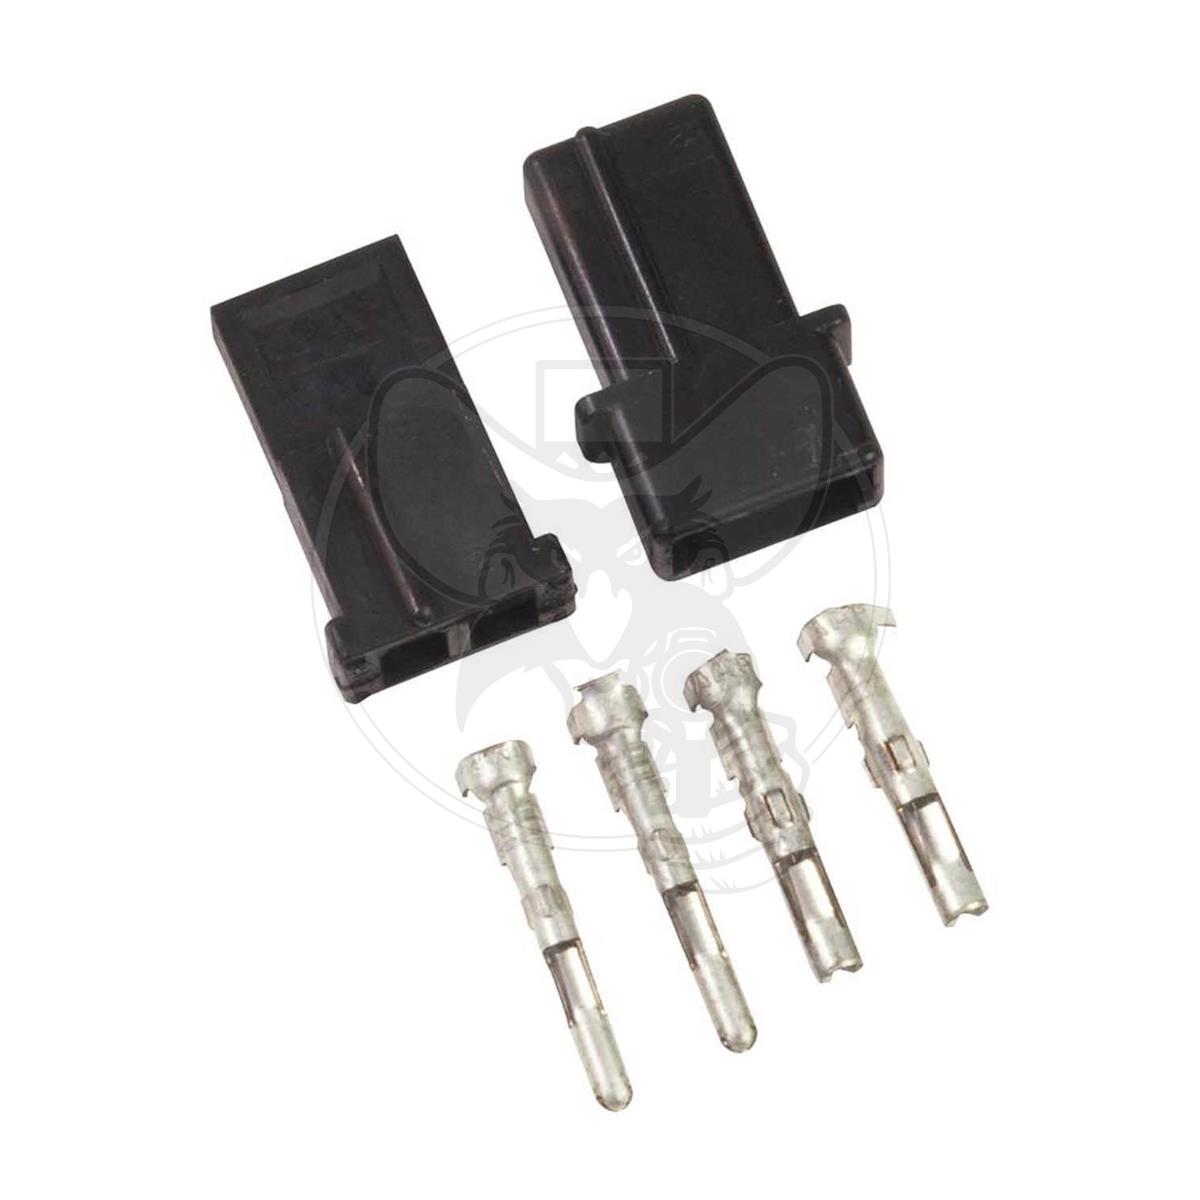 MSD 2 PIN WIRE CONNECTOR KIT